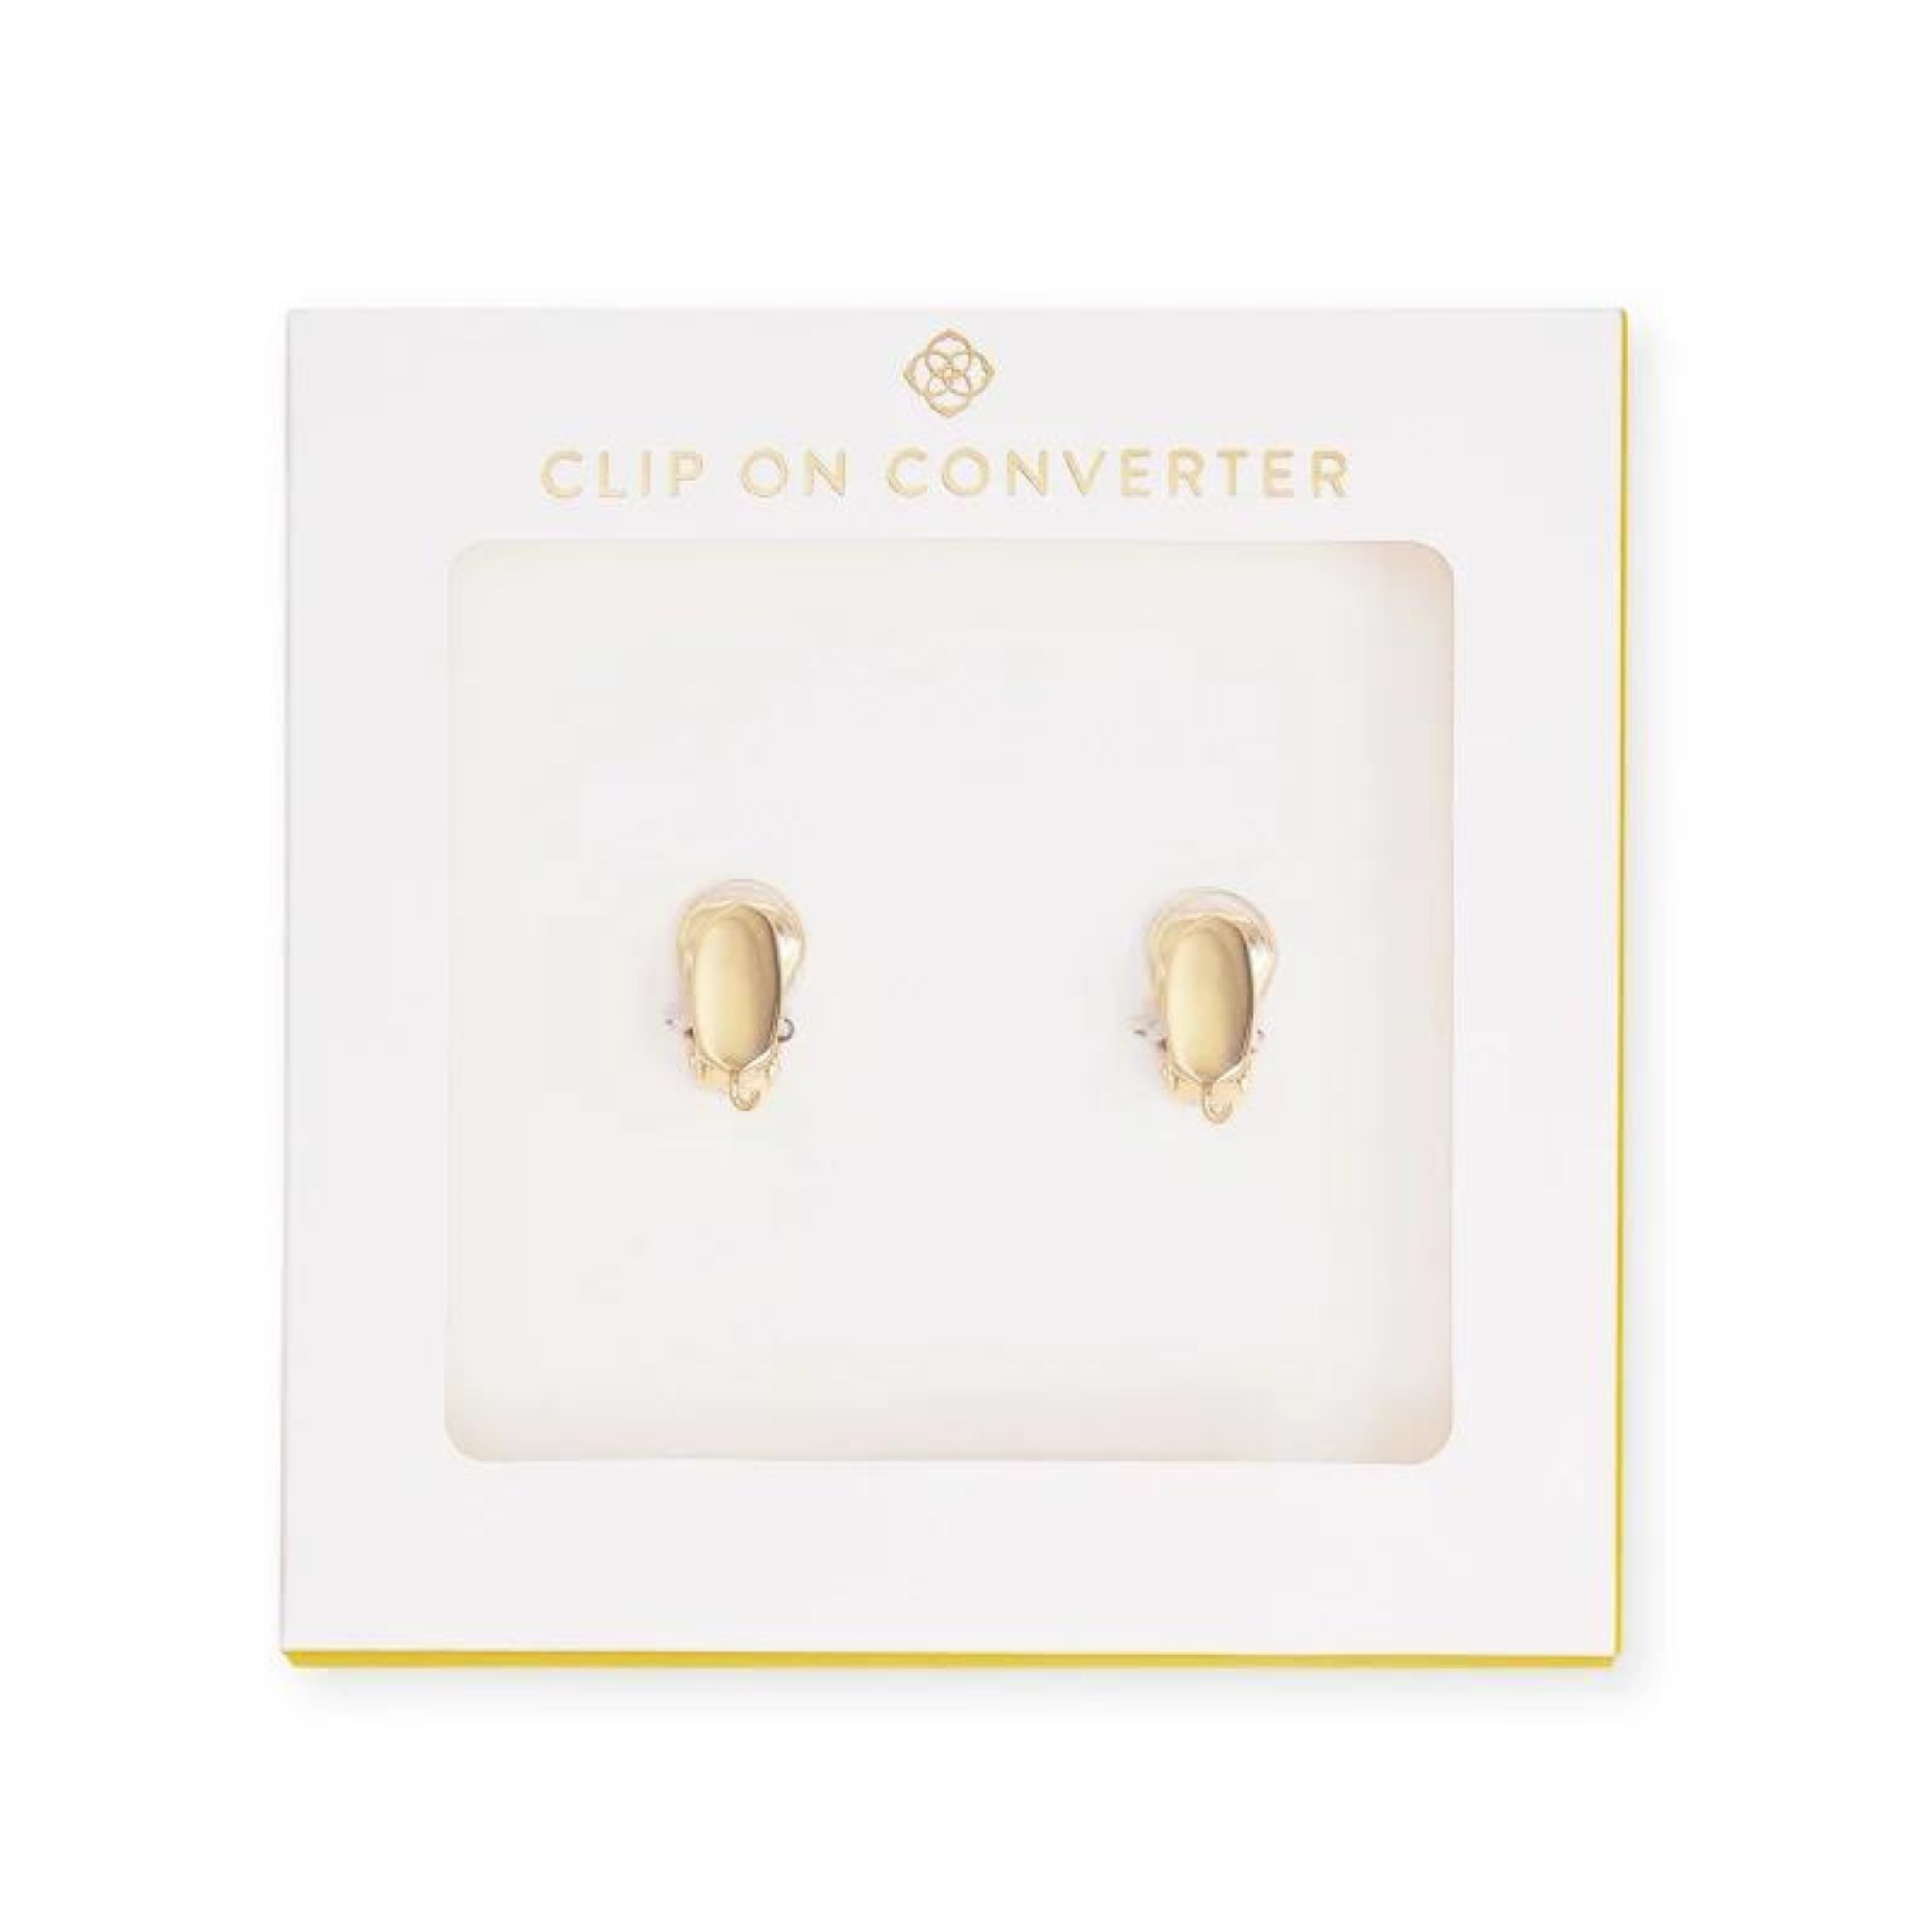 Kendra Scott | Clip On Converter in Gold - Giddy Up Glamour Boutique